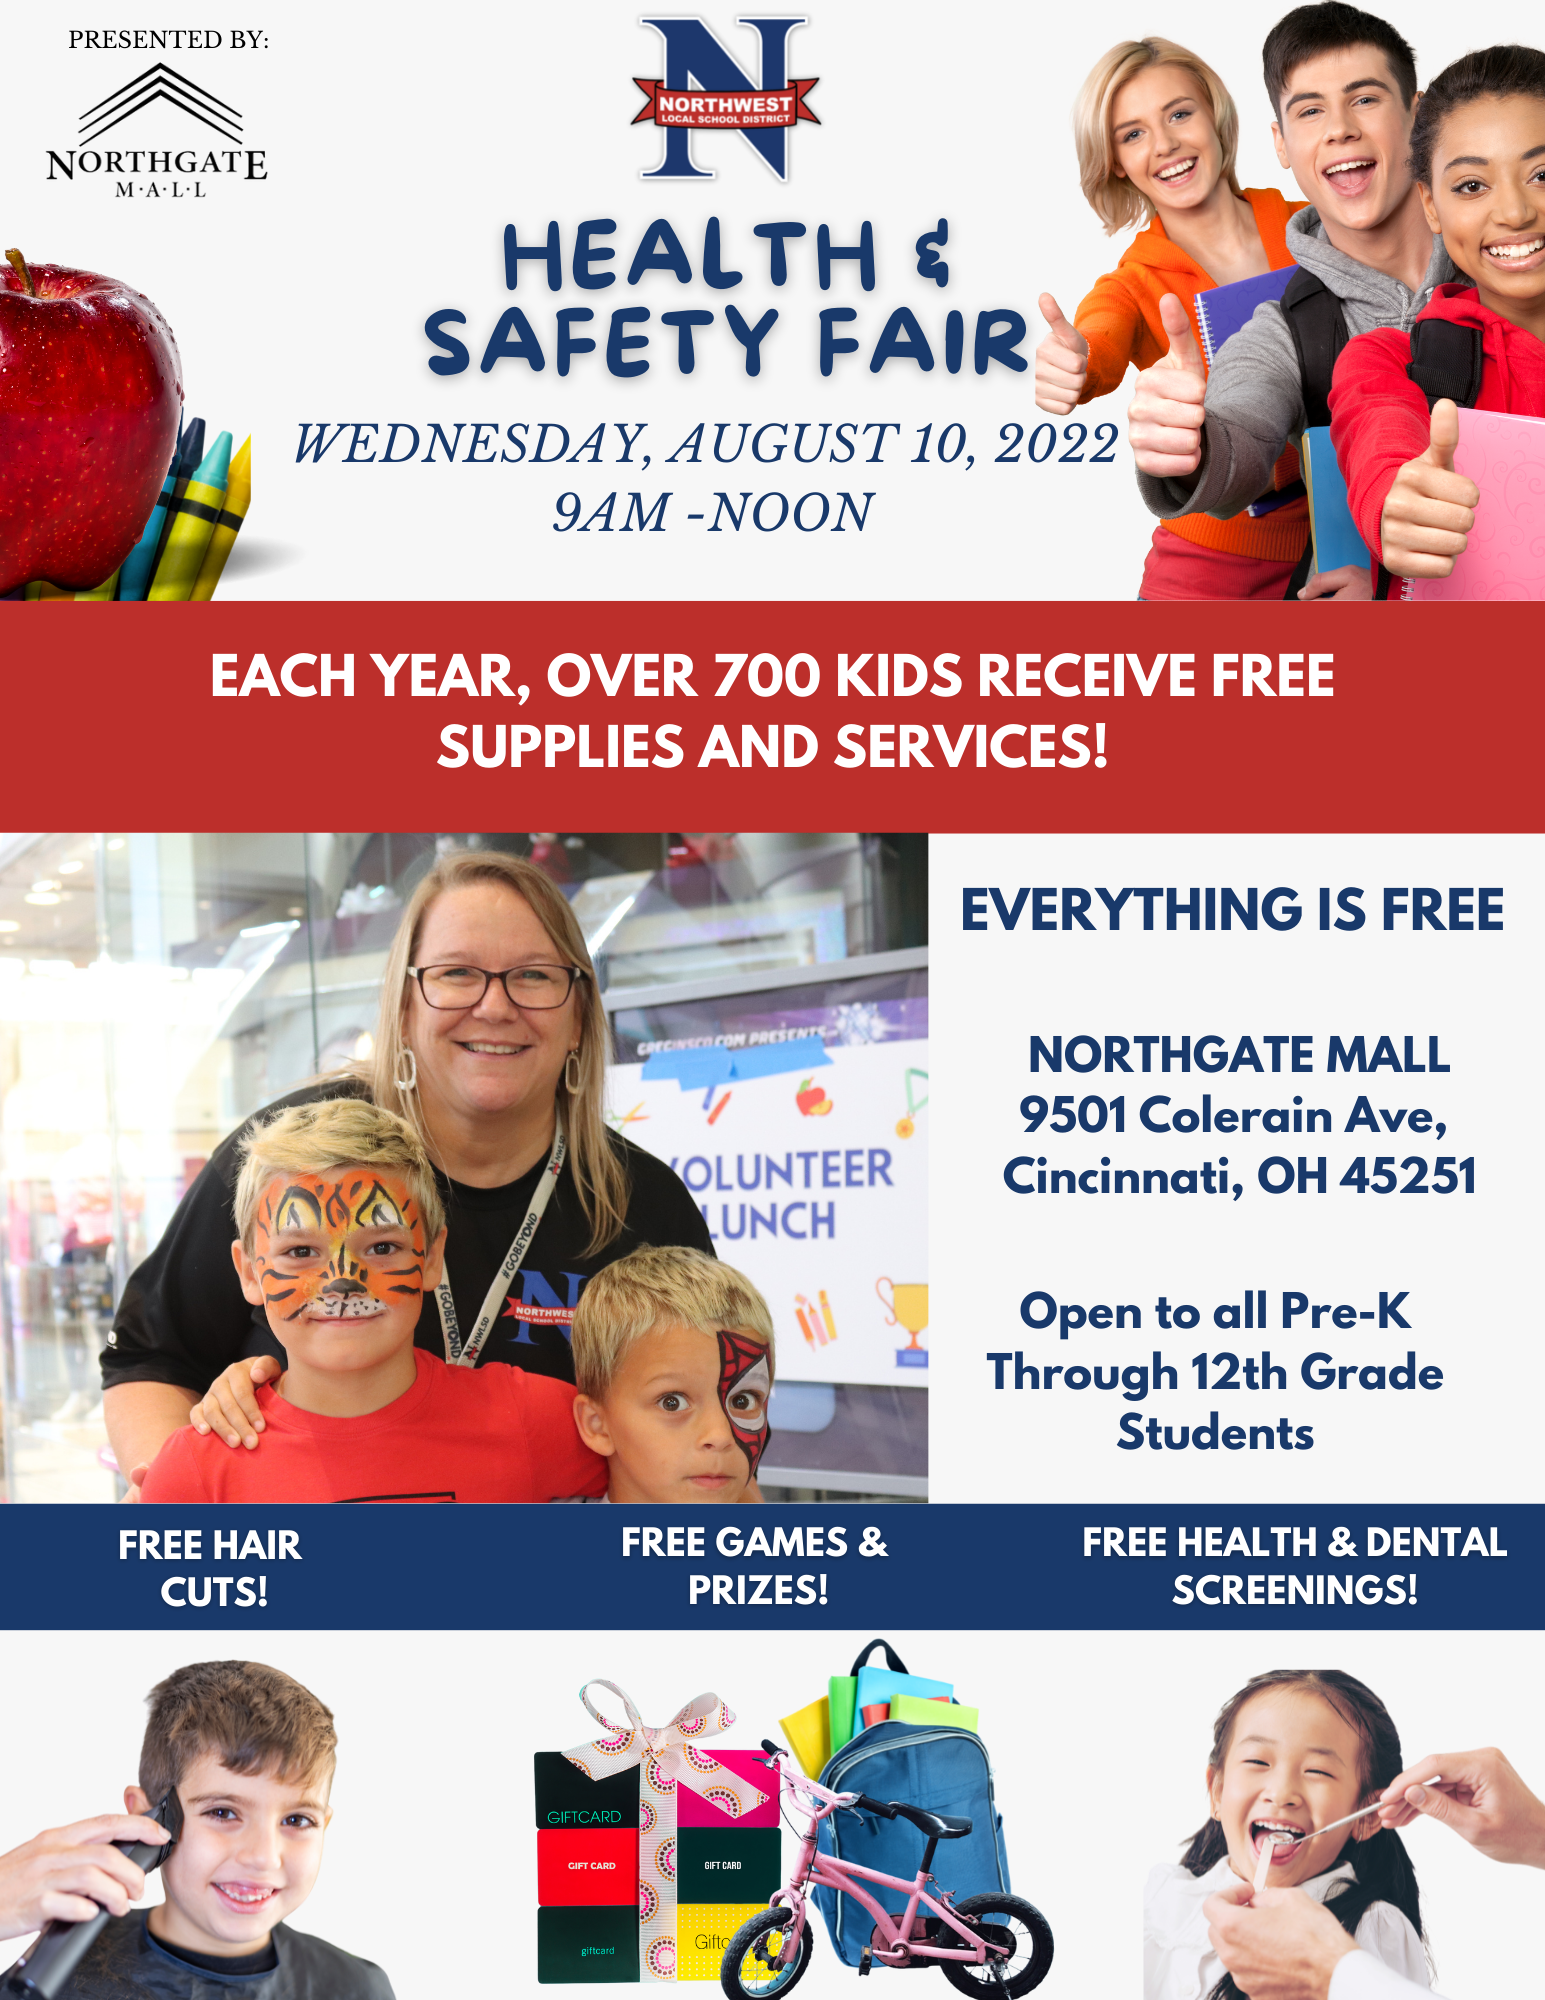 SAVE THE DATE! On August 10, 2022 from 9 am-12 pm, NWLSD will once again be hosting its Annual Back To School Health and Safety Fair at Northgate Mall